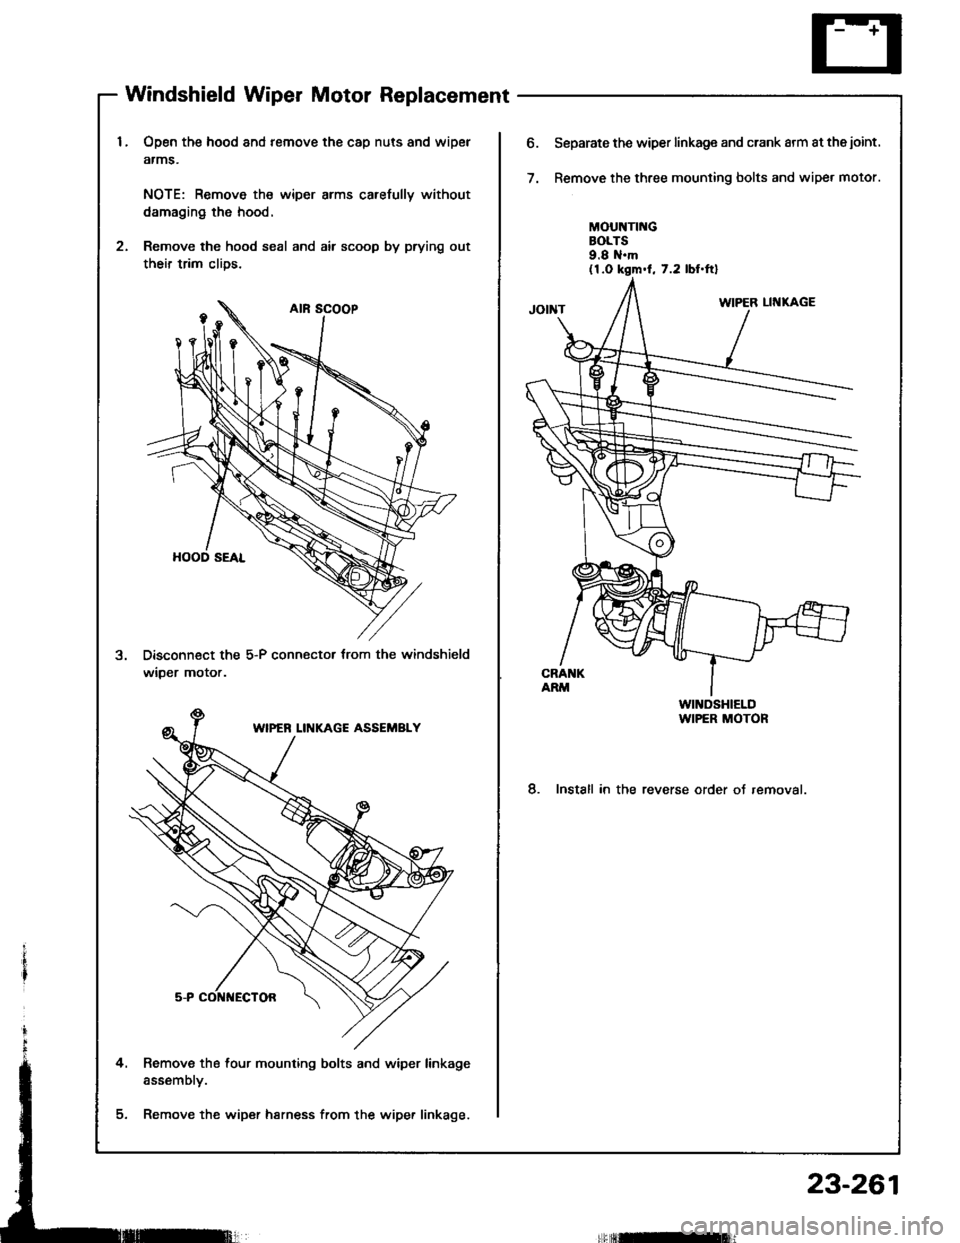 HONDA INTEGRA 1994 4.G User Guide Windshield Wiper Motor Replacement
Open the hood and remove the cap nuts and wipel
atms.
NOTE: Remove th€ wiper arms carefully without
damaging the hood.
Remove the hood seal and air scoop by prying